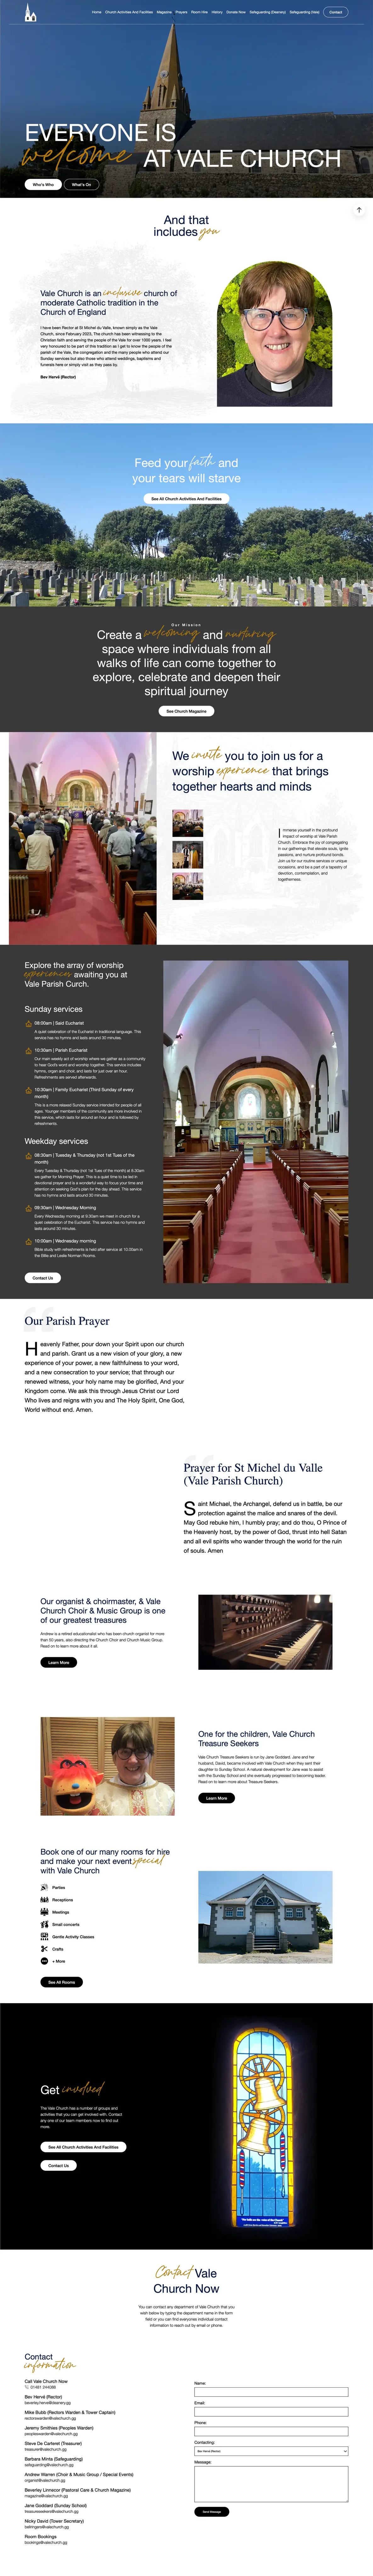 Vale Church Home Page